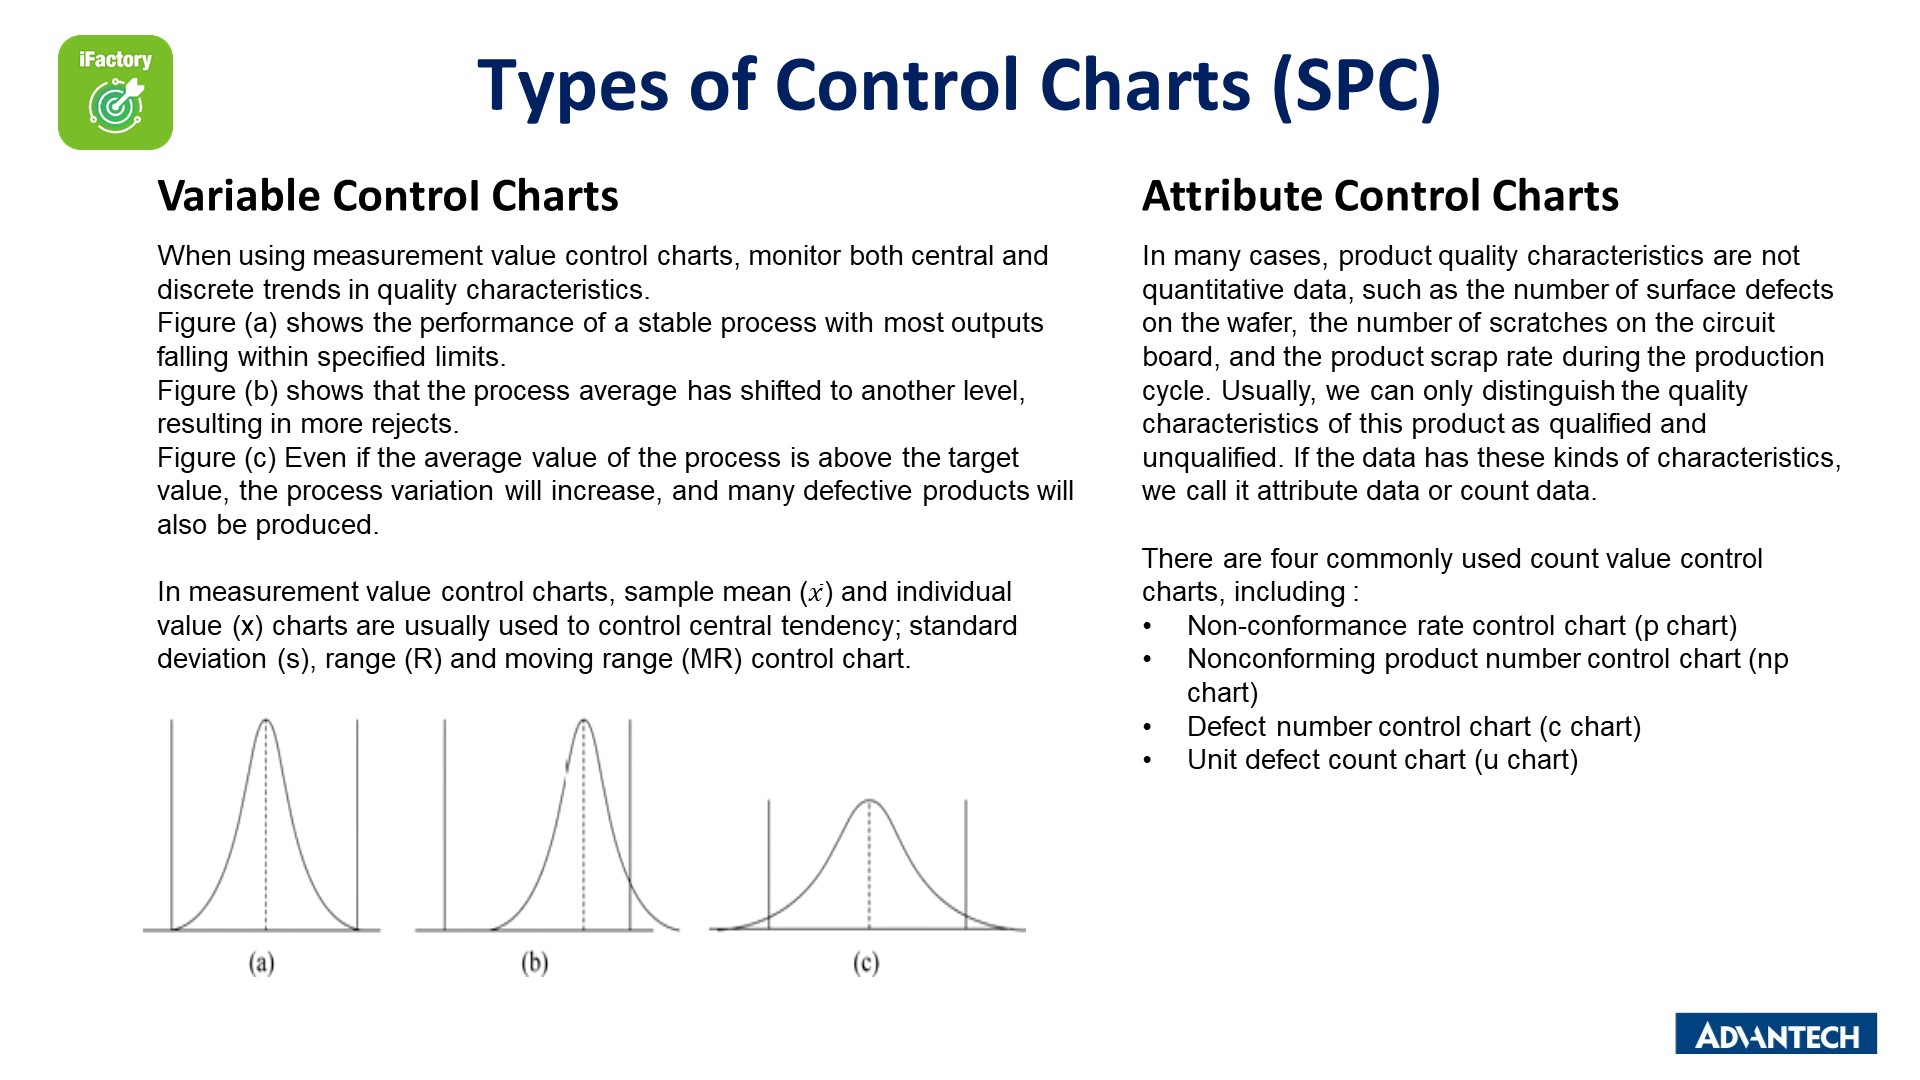 Types of Control Charts (SPC)